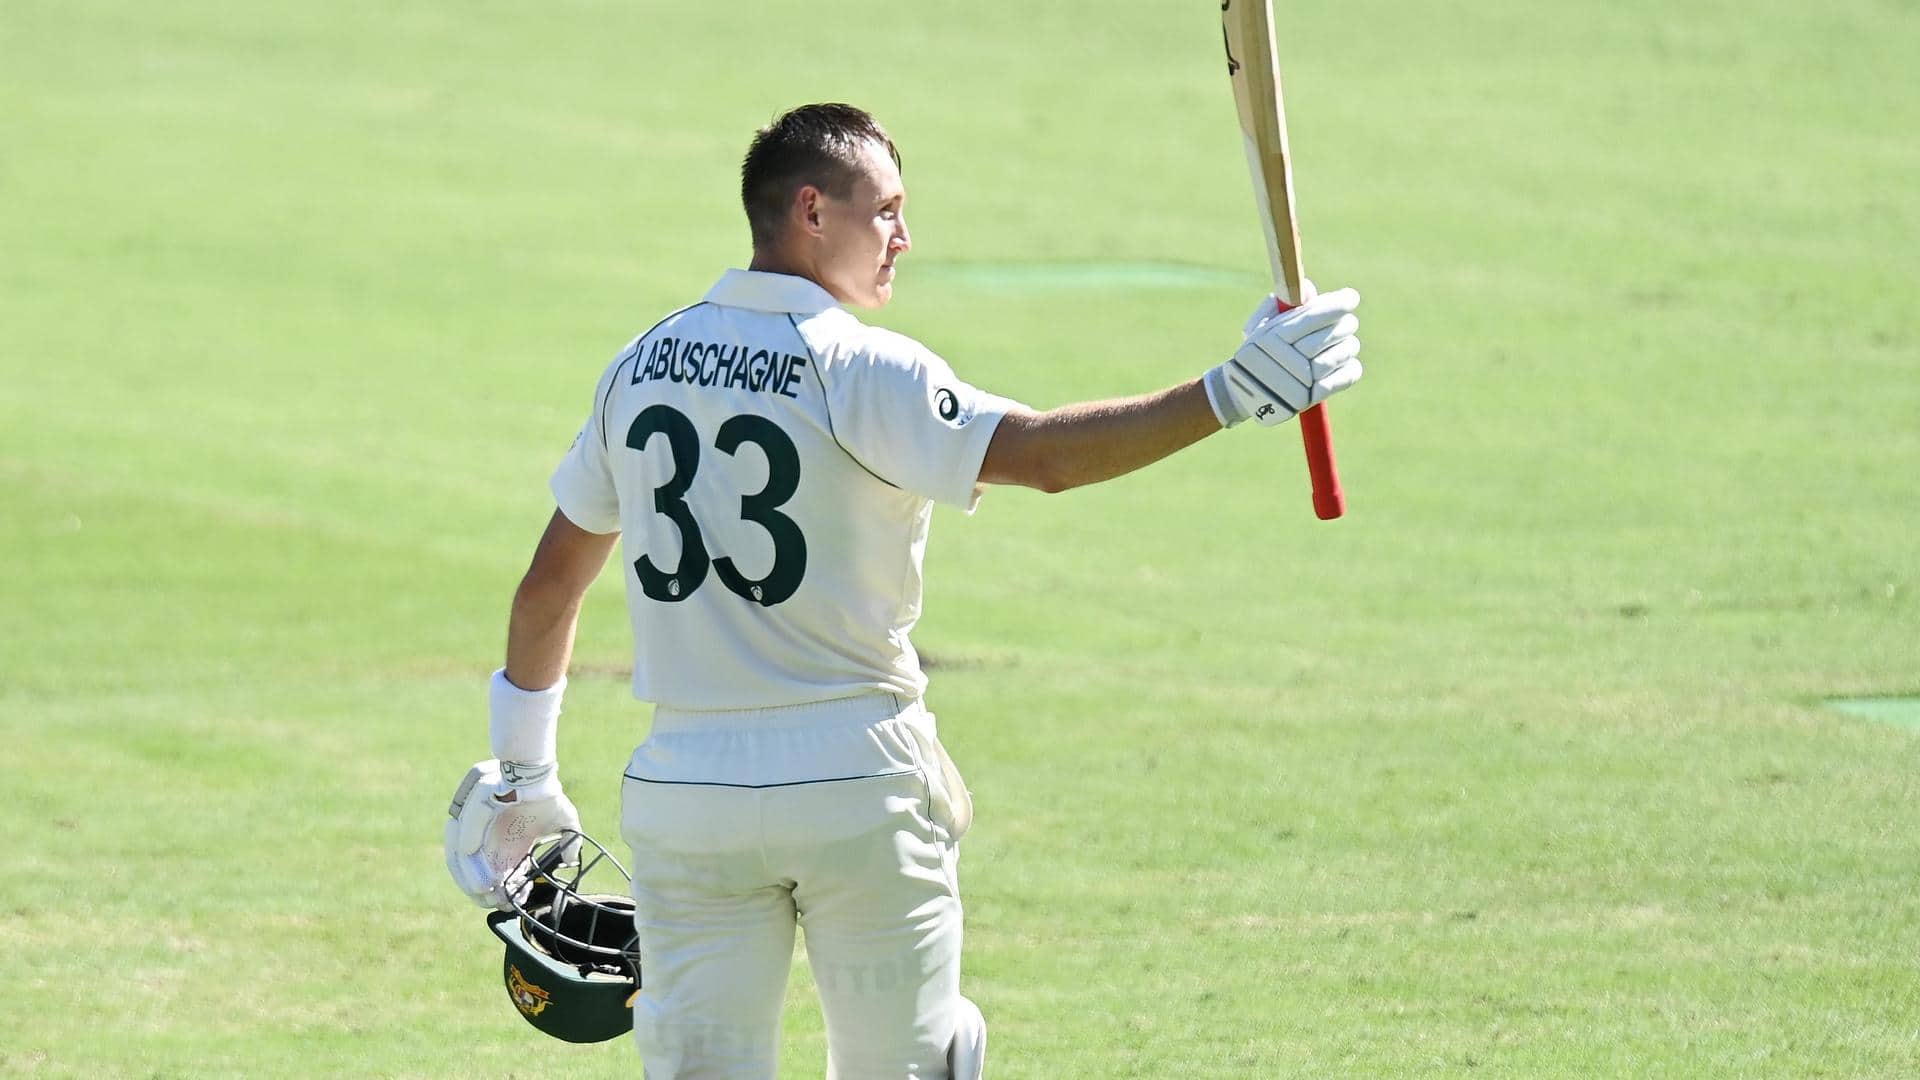 Labuschagne goes atop ICC Test Rankings, Root drops down